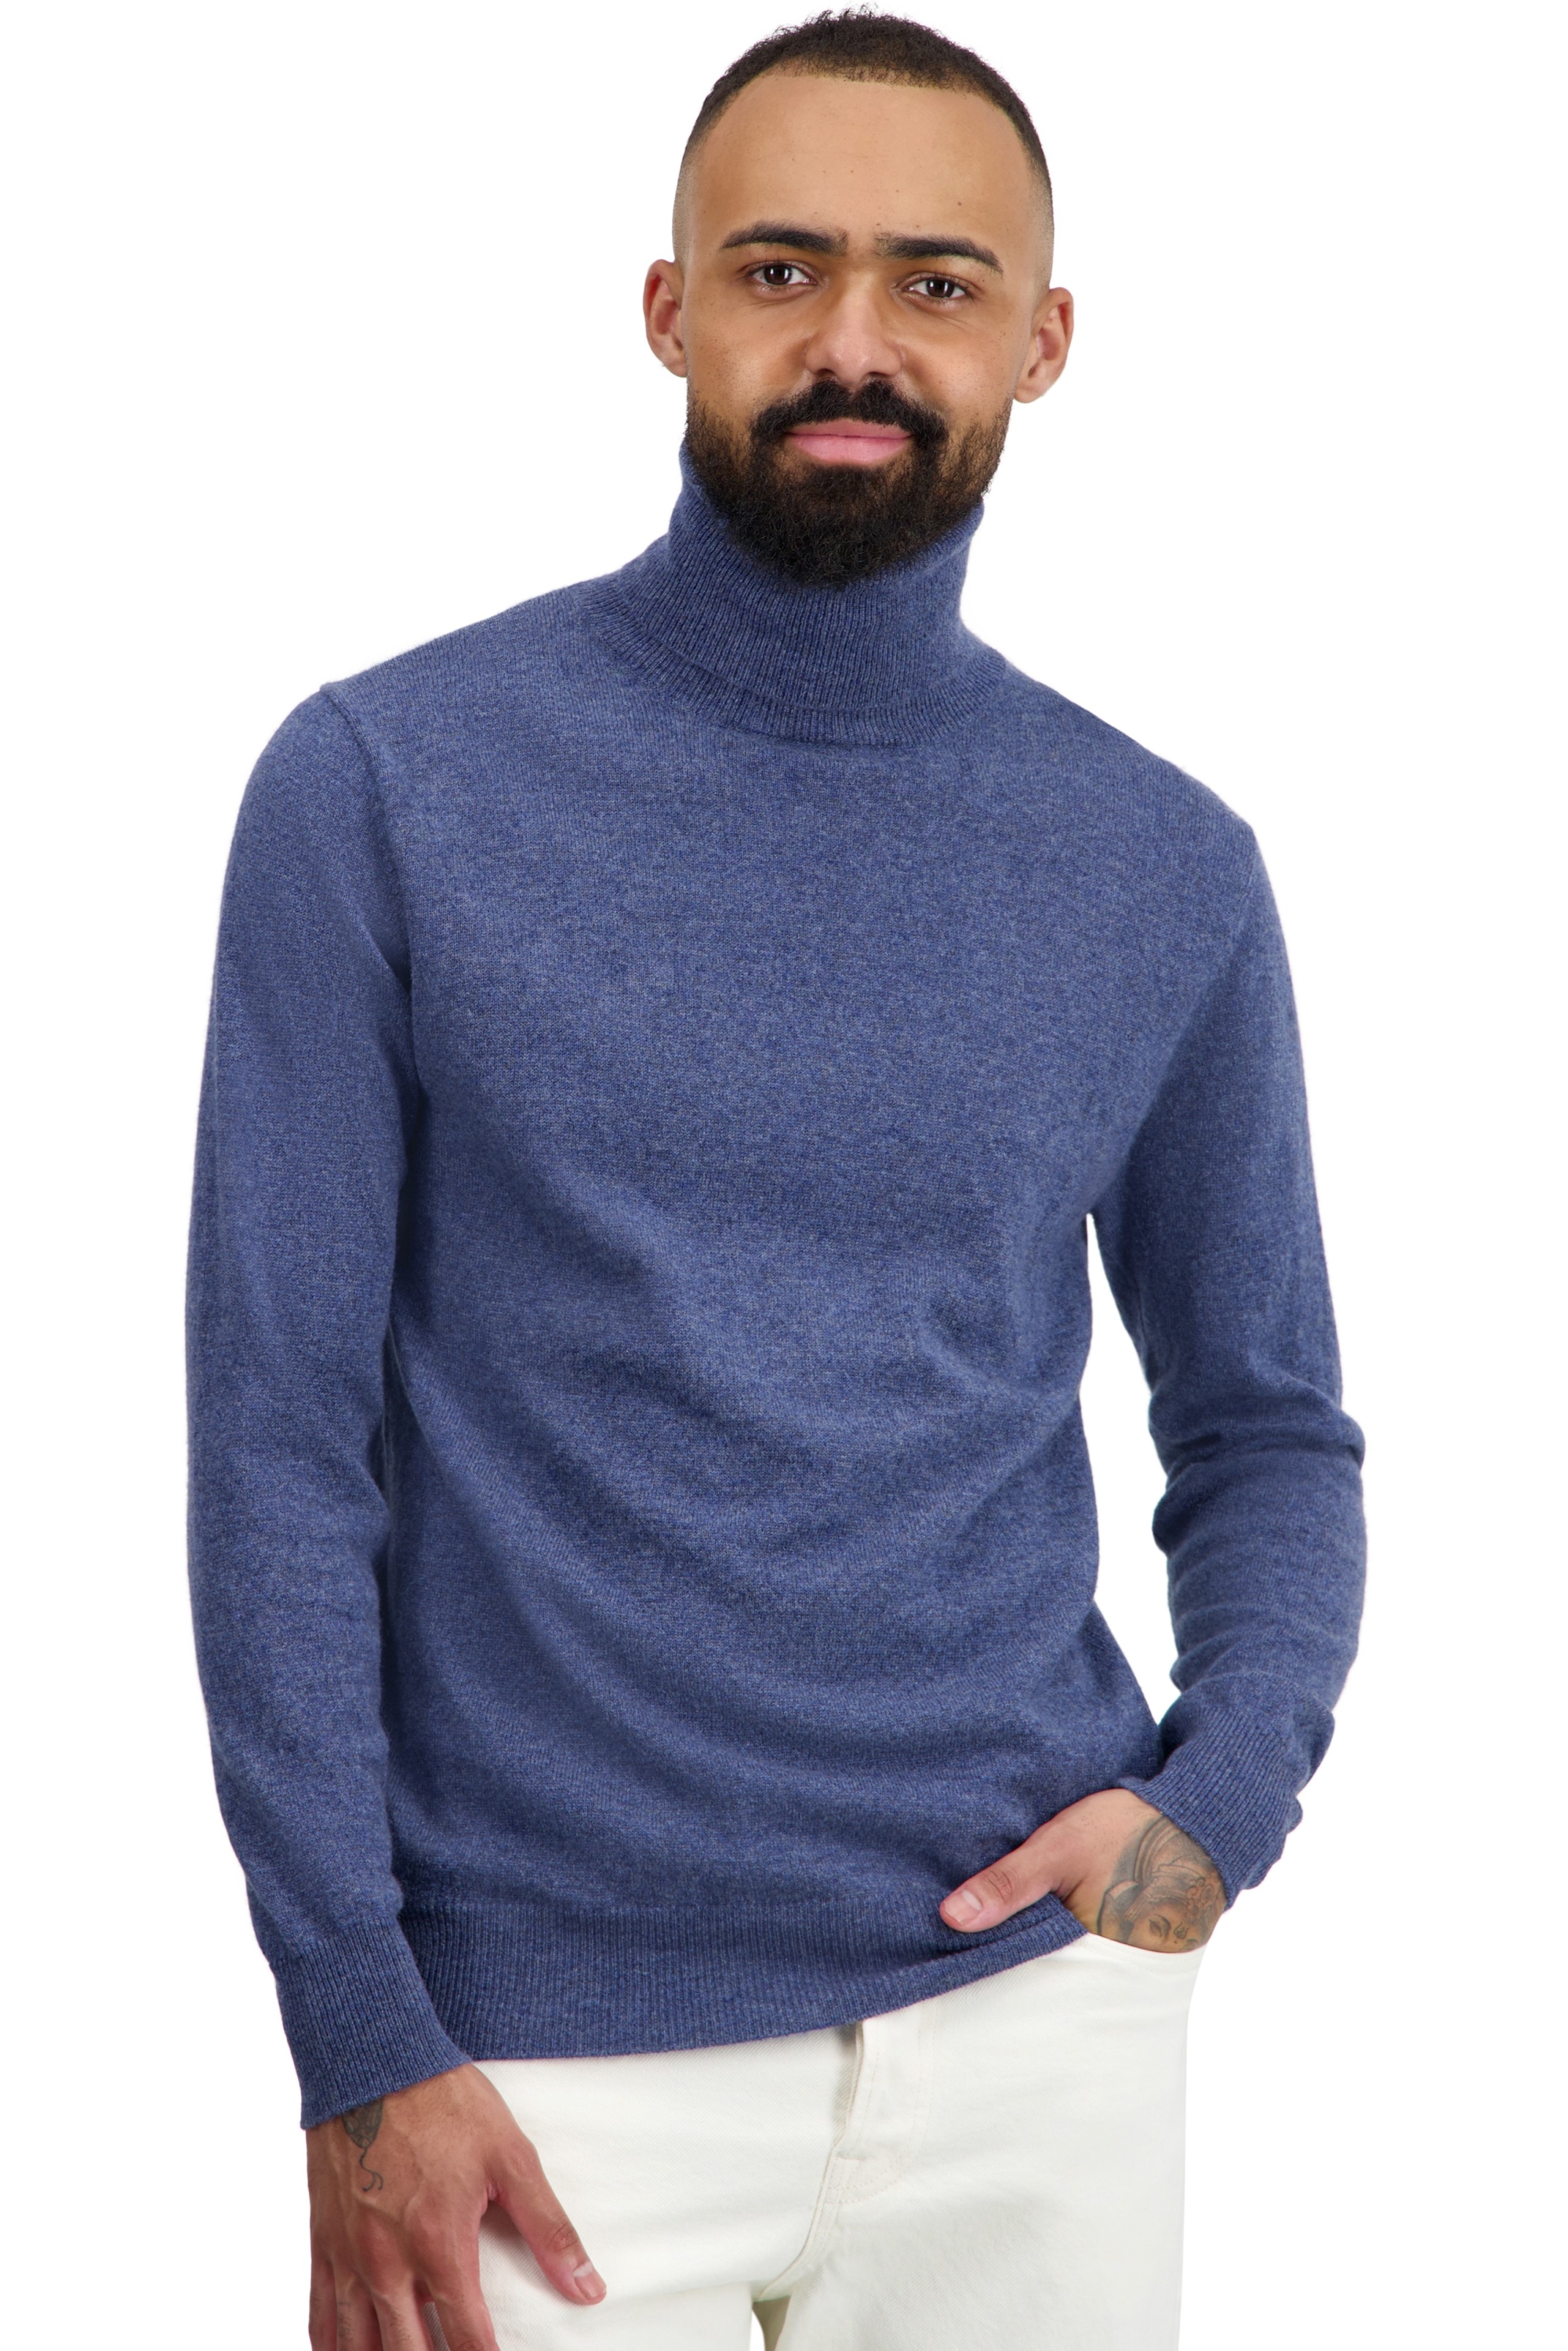 Cashmere men low prices tarry first nordic blue m